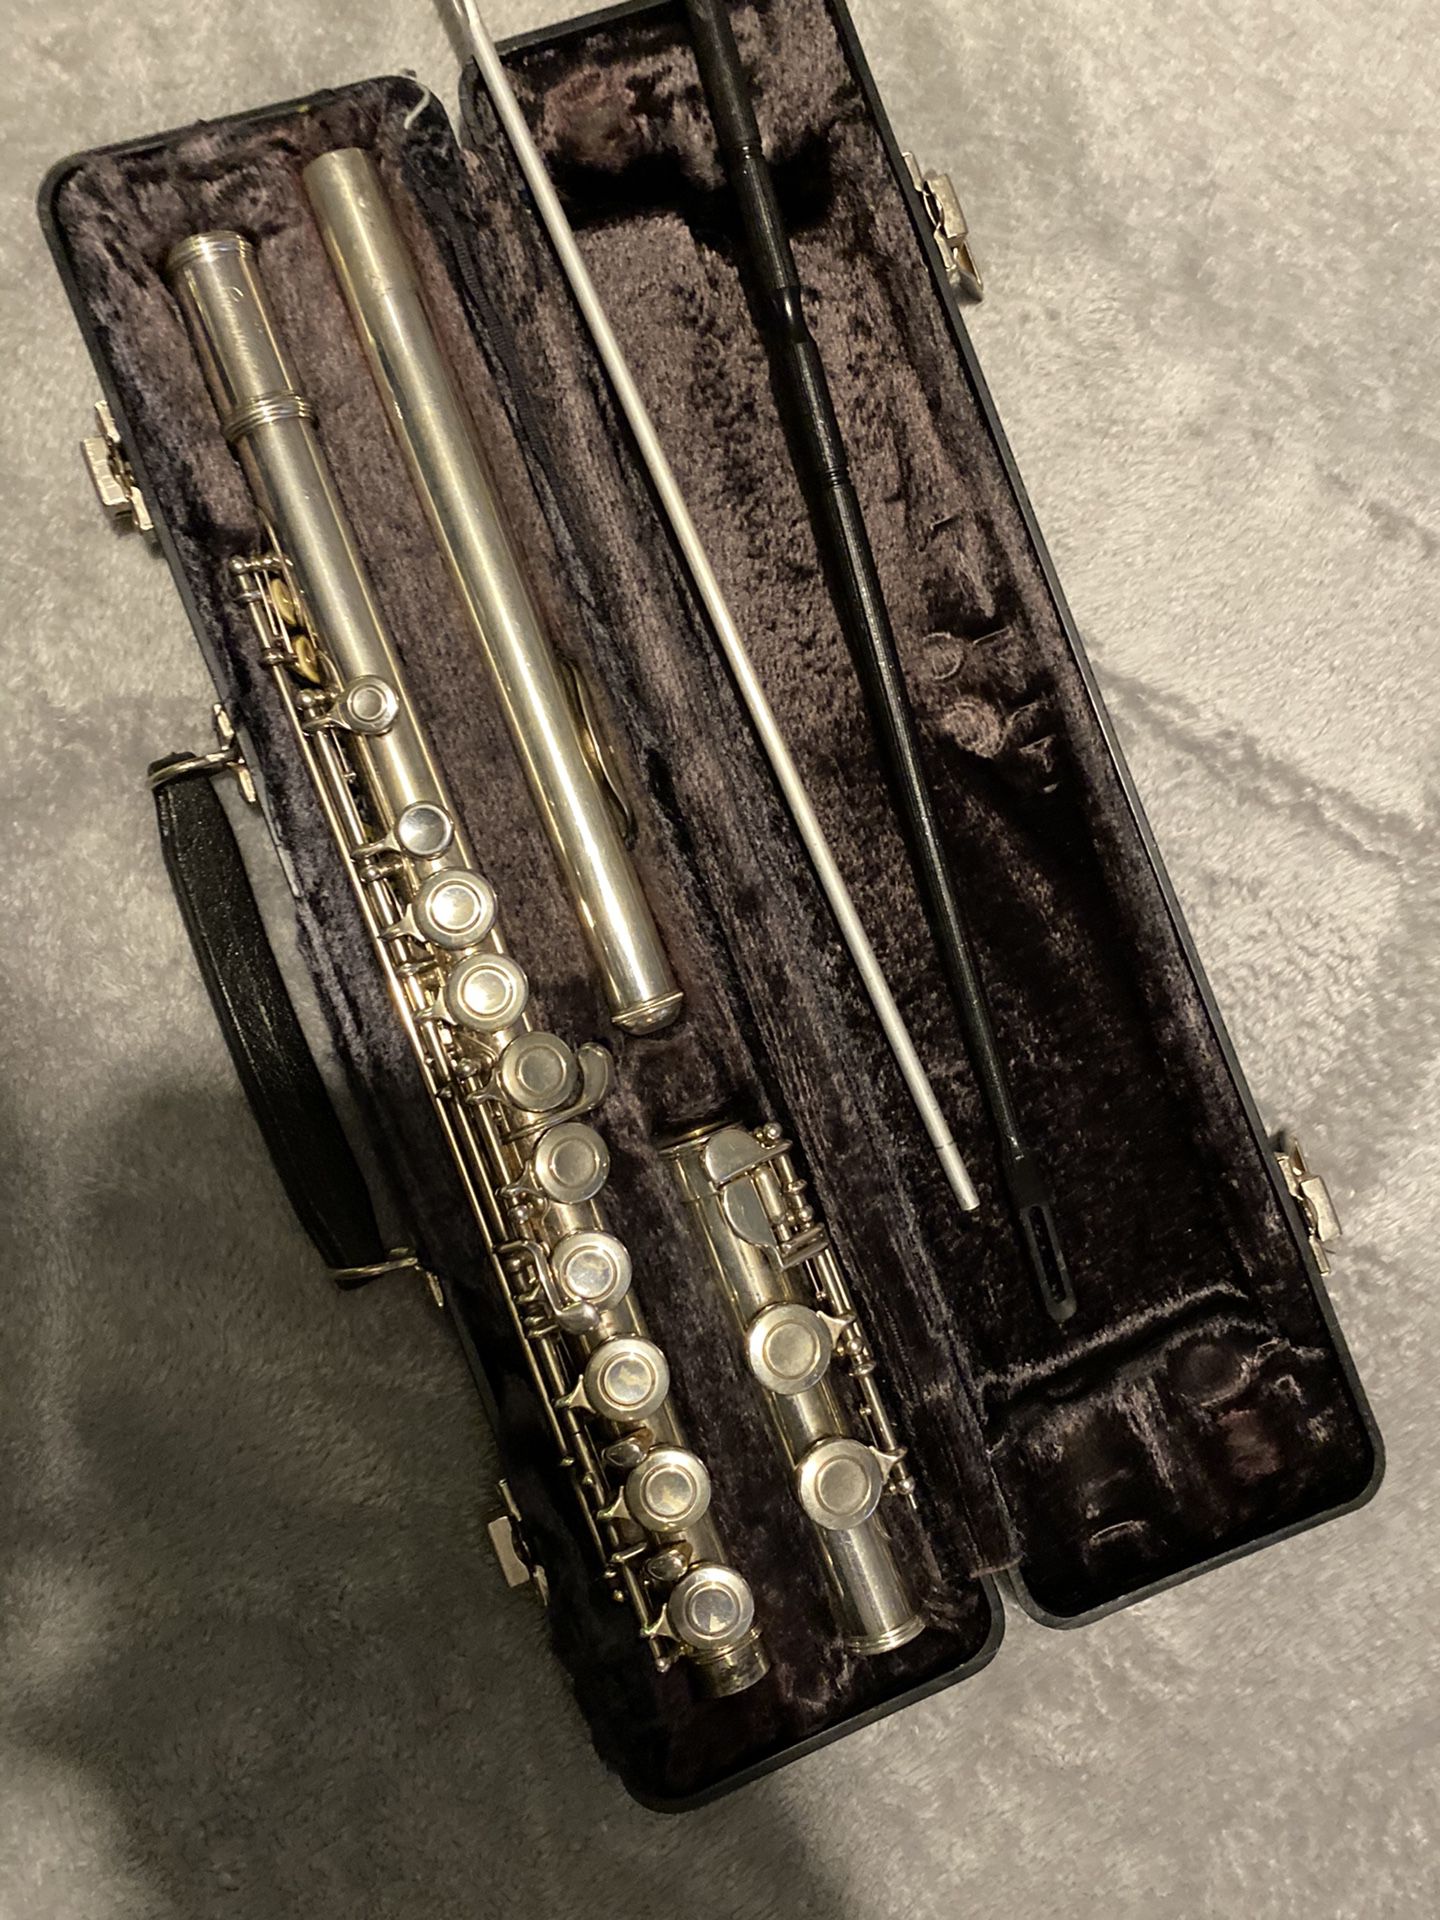 Armstrong flute